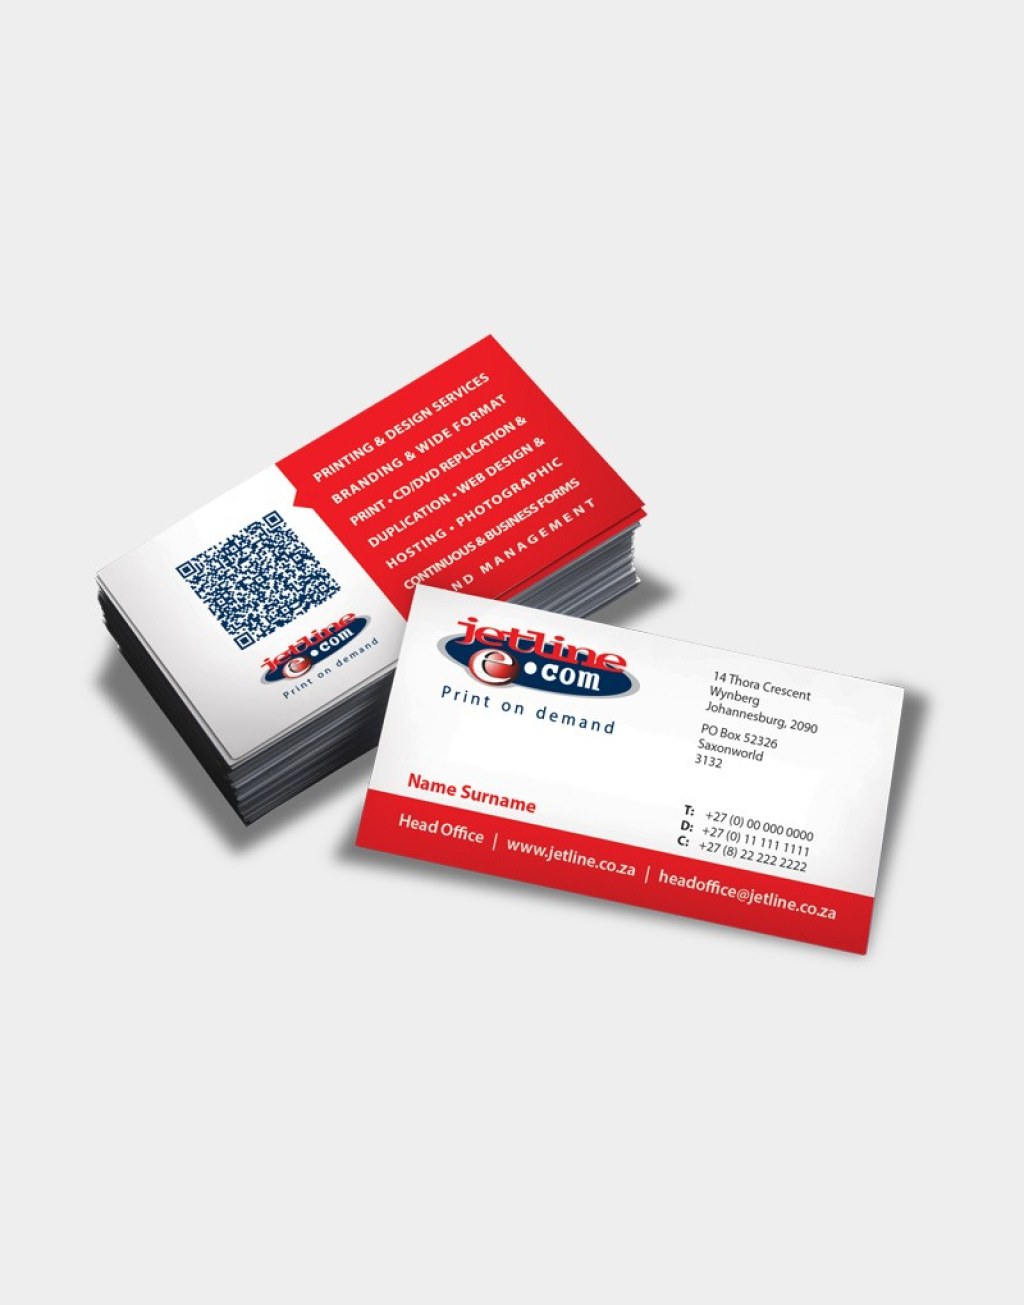 printing business card business - Business Card Printing  Business Cards  Jetline Printing